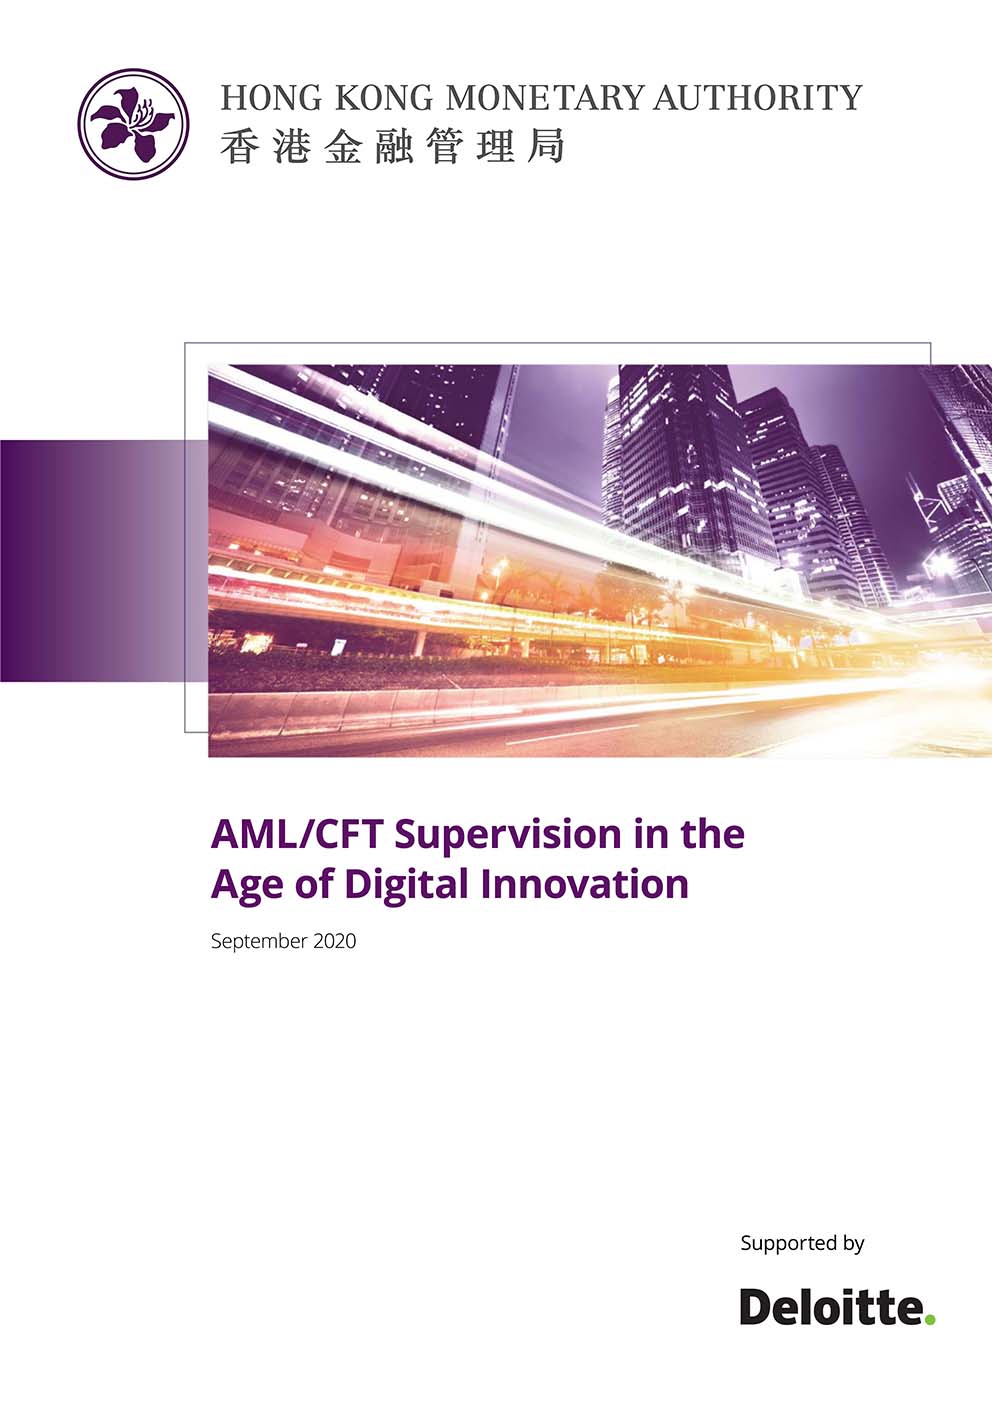 AML/CFT Supervision in the Age of Digital Innovation